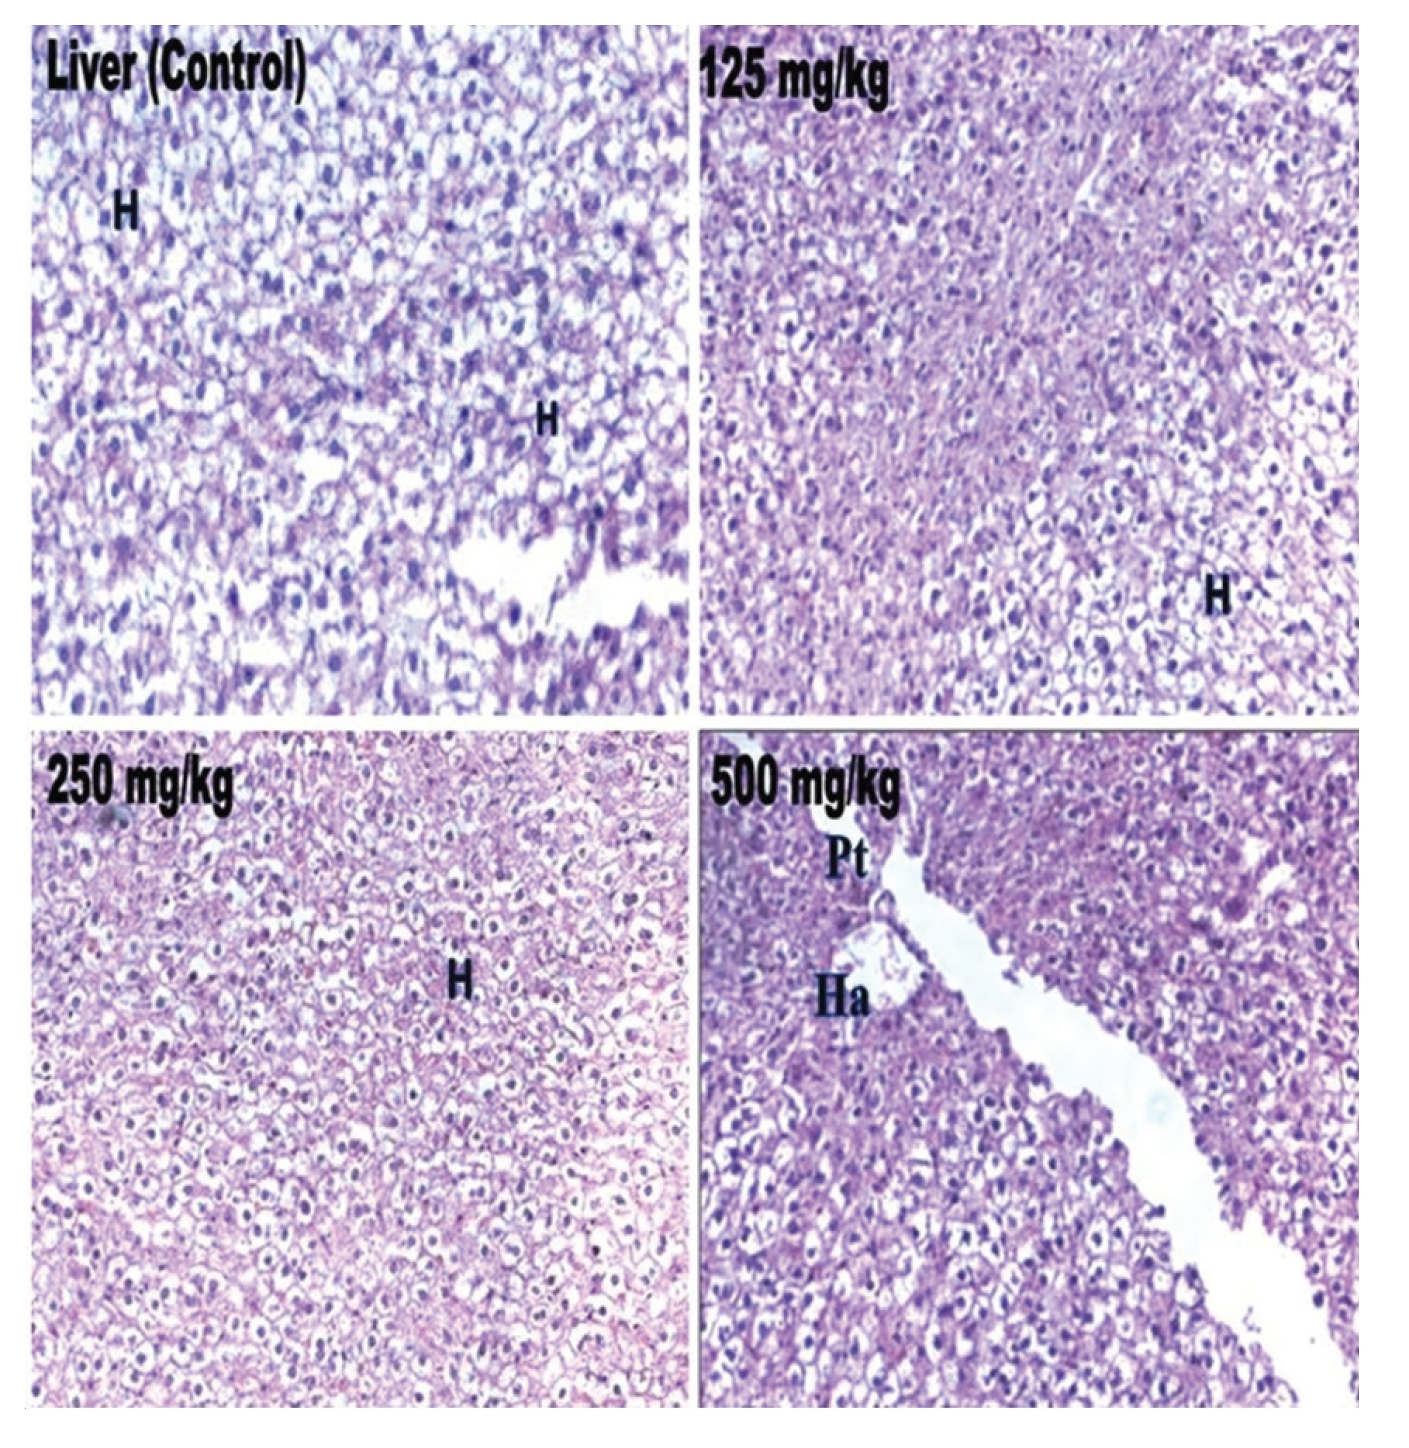 Histopathological examinations of rat liver sections from
the control rats and from the test rats treated with extract of W. volubilis.
H, hepatocytes; Ha, hepatic artery; Pt, portal track.